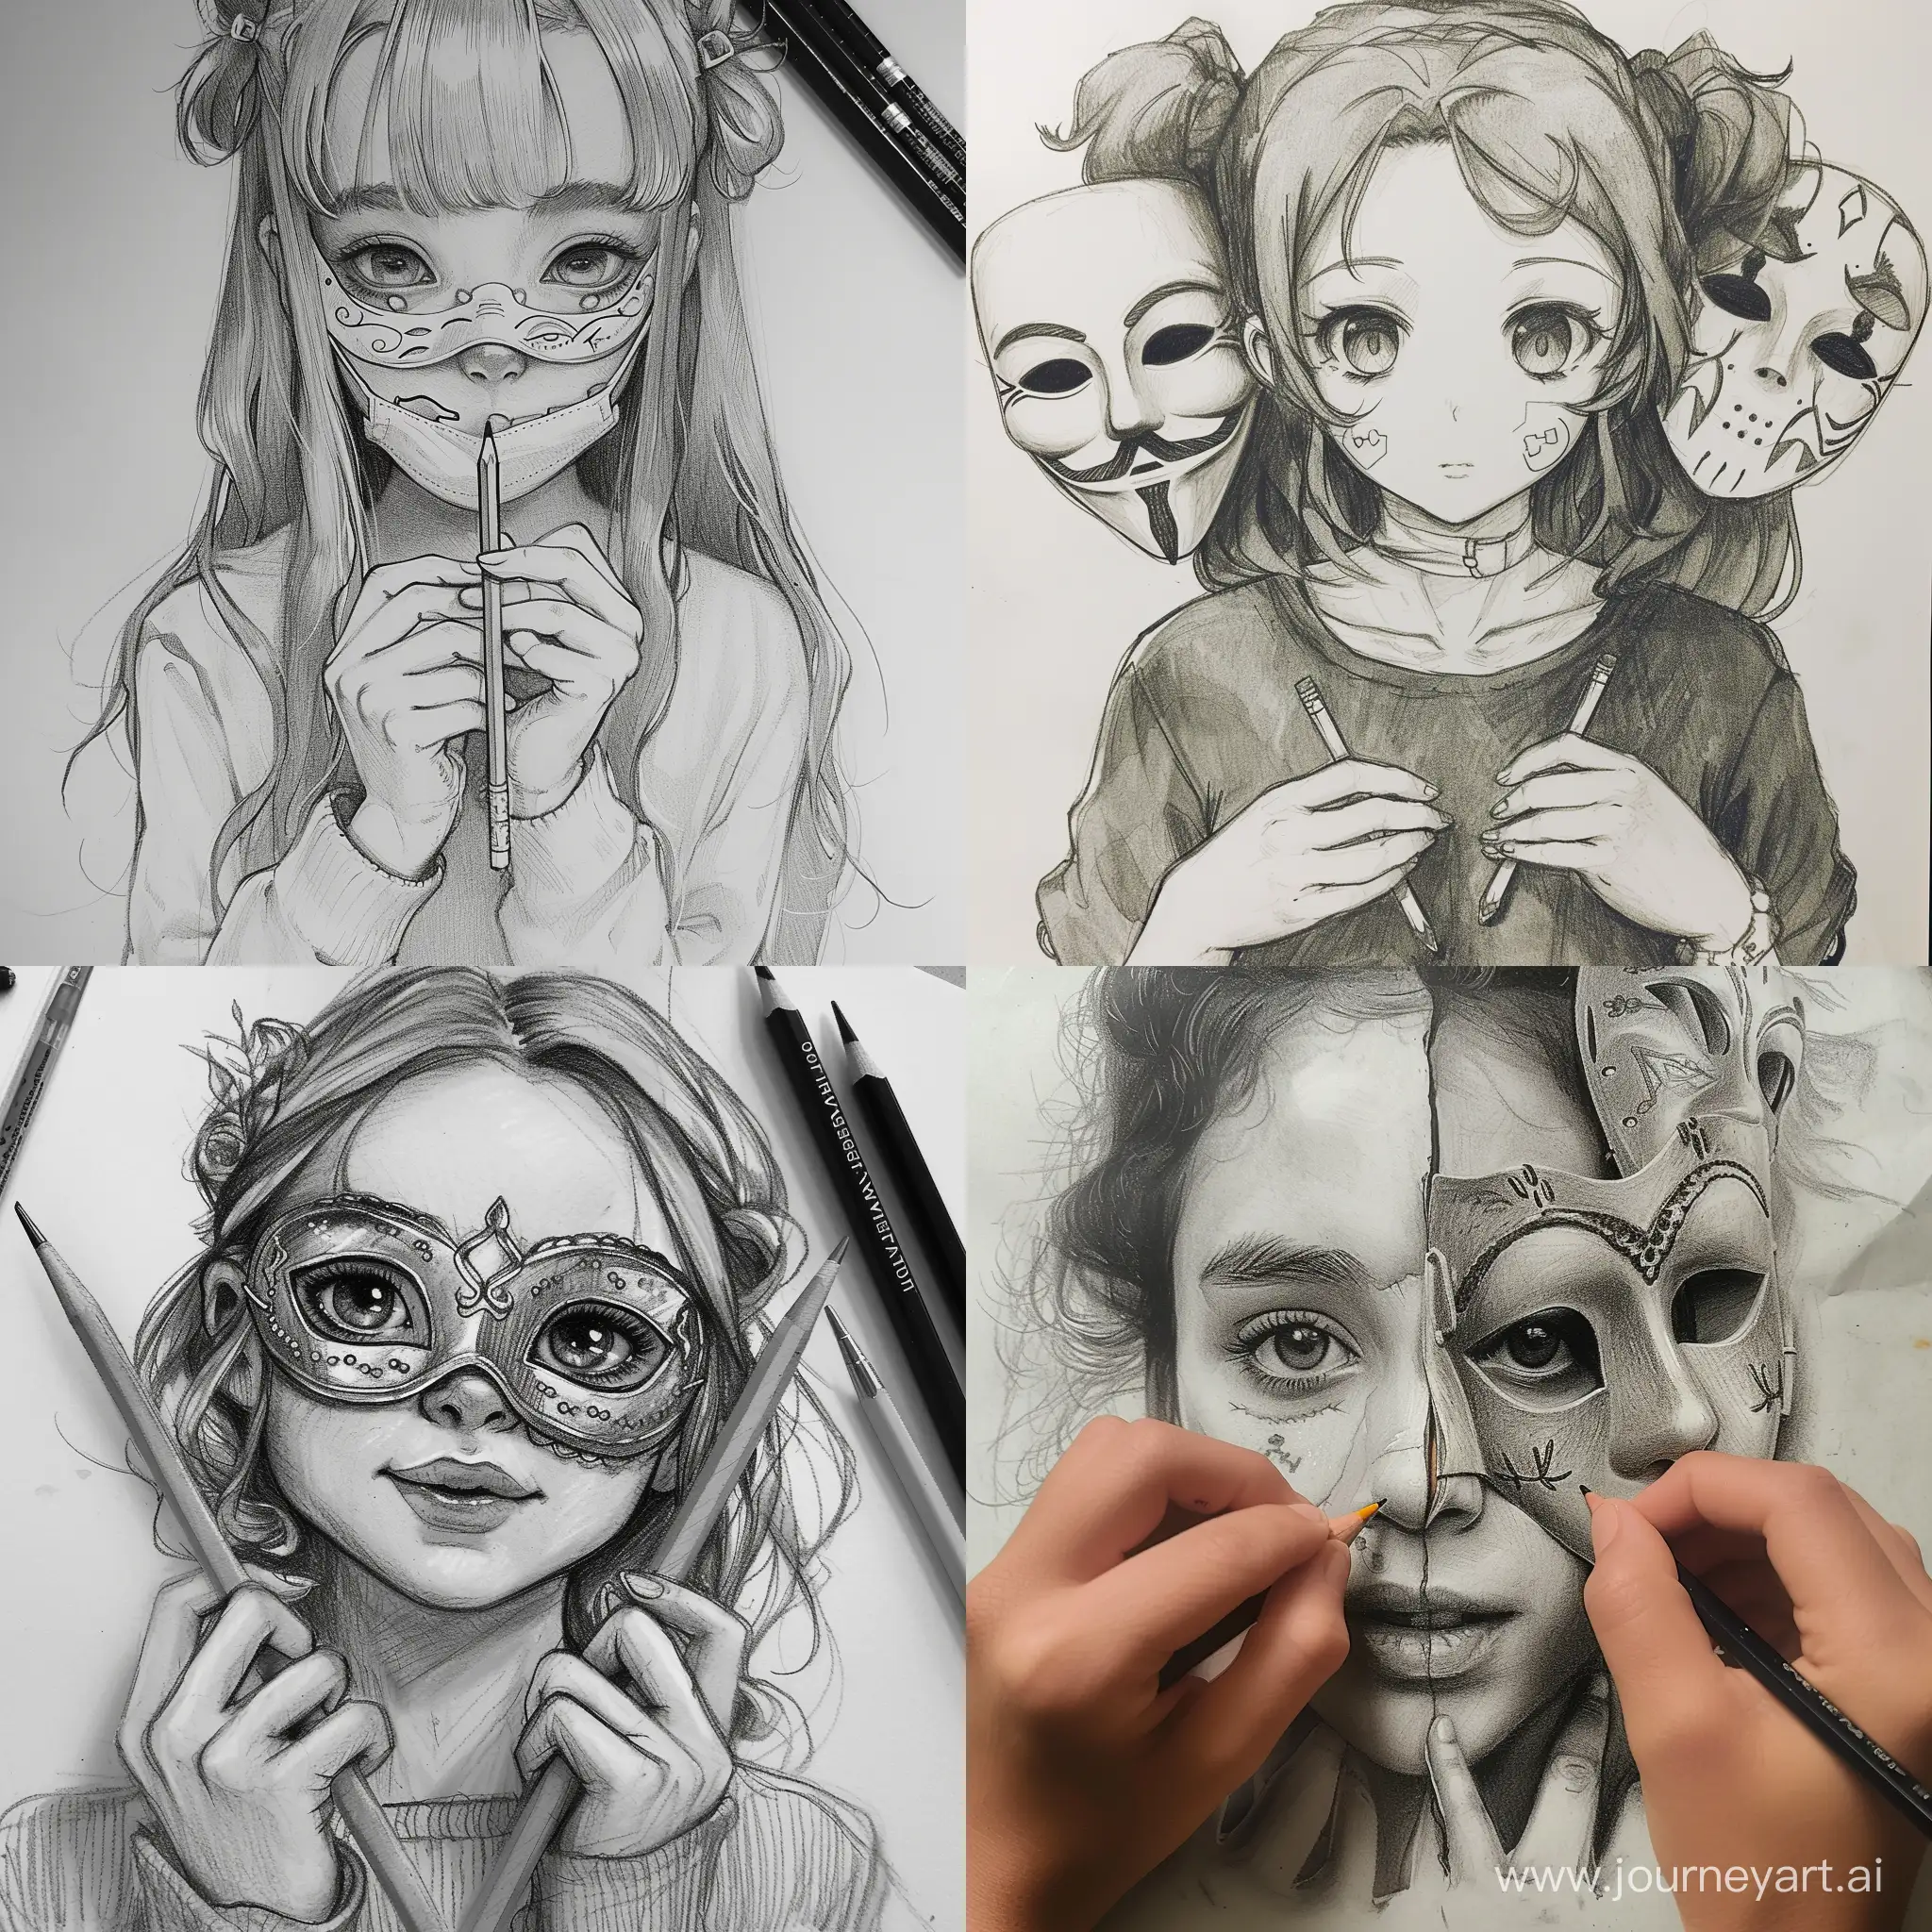 Young-Artist-Girl-with-Masks-and-Pencil